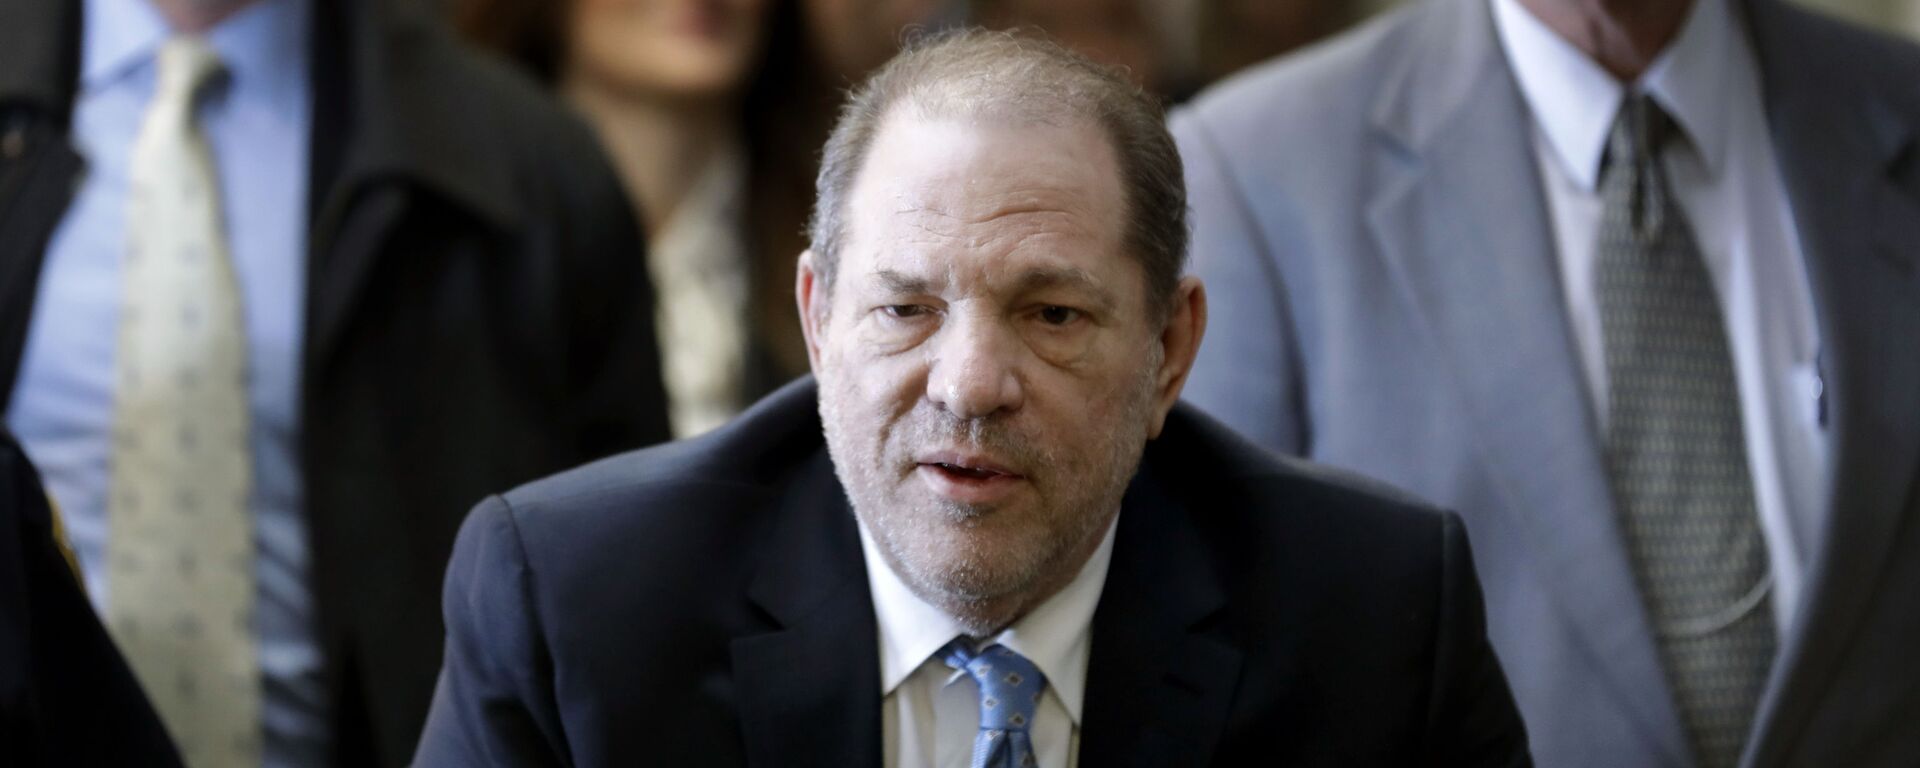 In this Feb. 24, 2020, file photo, Harvey Weinstein arrives at a Manhattan courthouse as jury deliberations continue in his rape trial in New York. The disgraced Hollywood film mogul and convicted rapist is asking a bankruptcy judge in Delaware to allow him to pursue arbitration in New York over what he claims is his wrongful termination from the company he co-founded. - Sputnik International, 1920, 09.10.2022